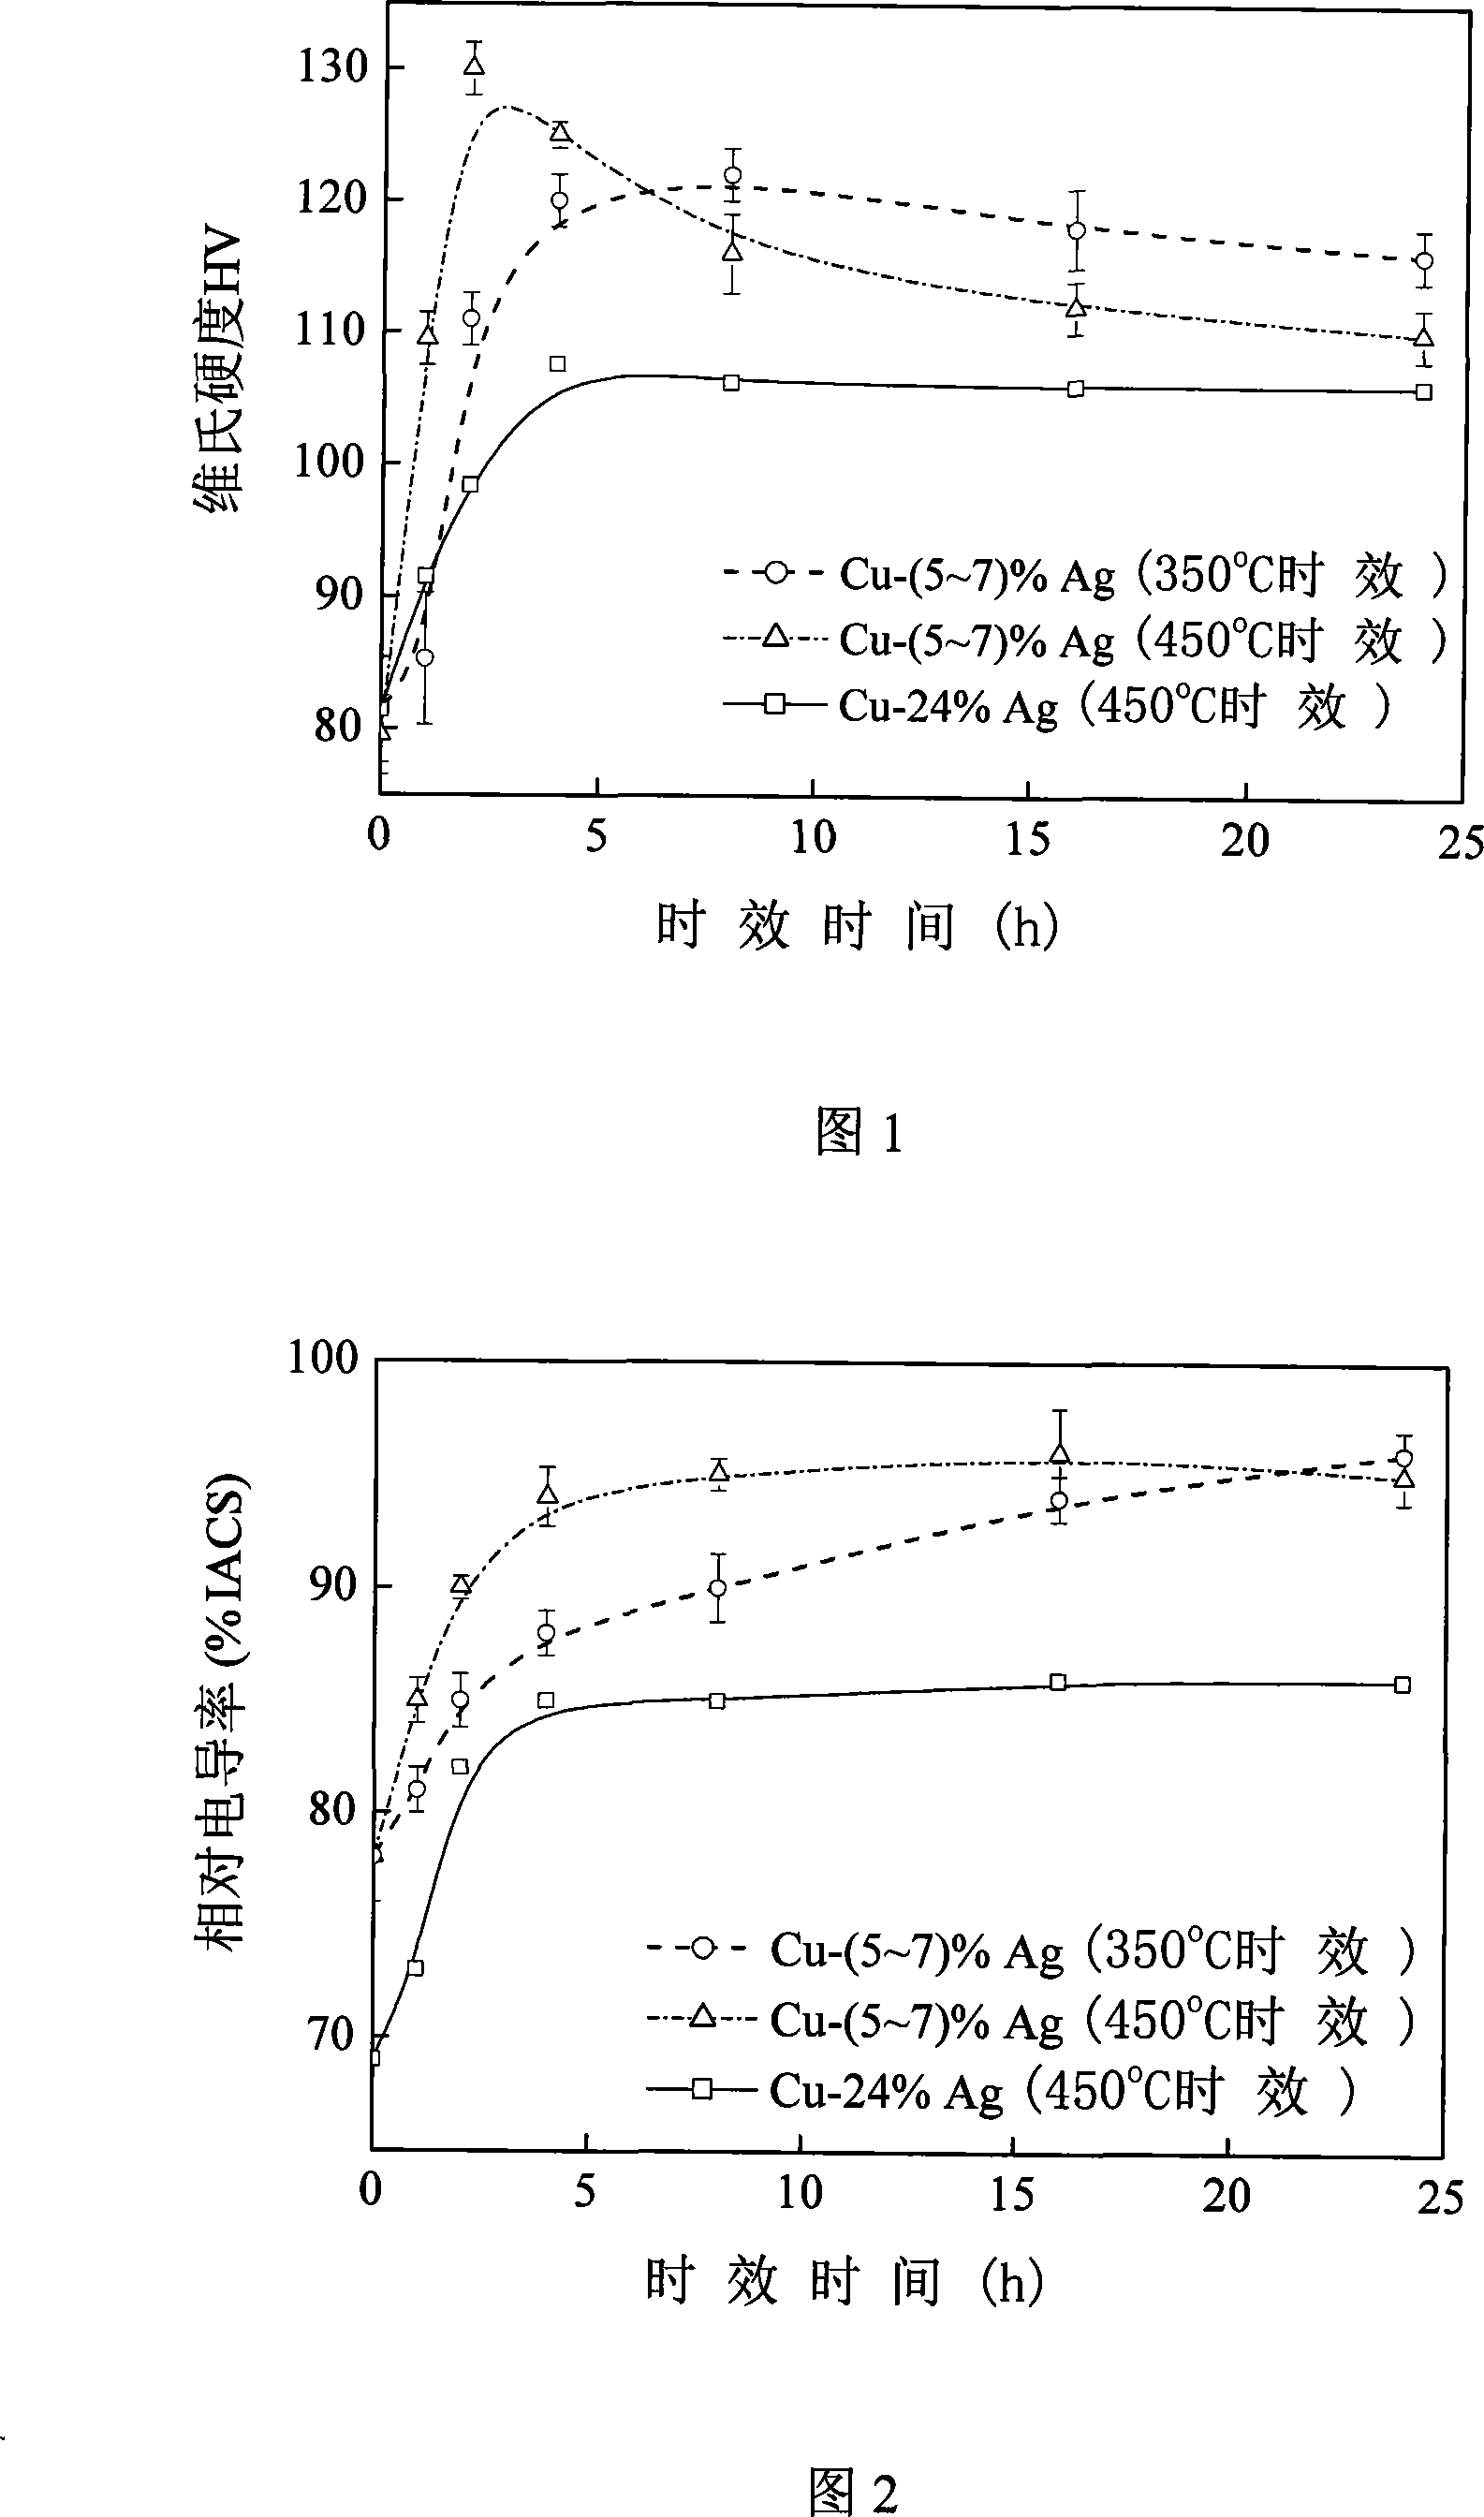 Solid solution aging technique for modifying Cu-Ag alloy rigidity and electric conductivity